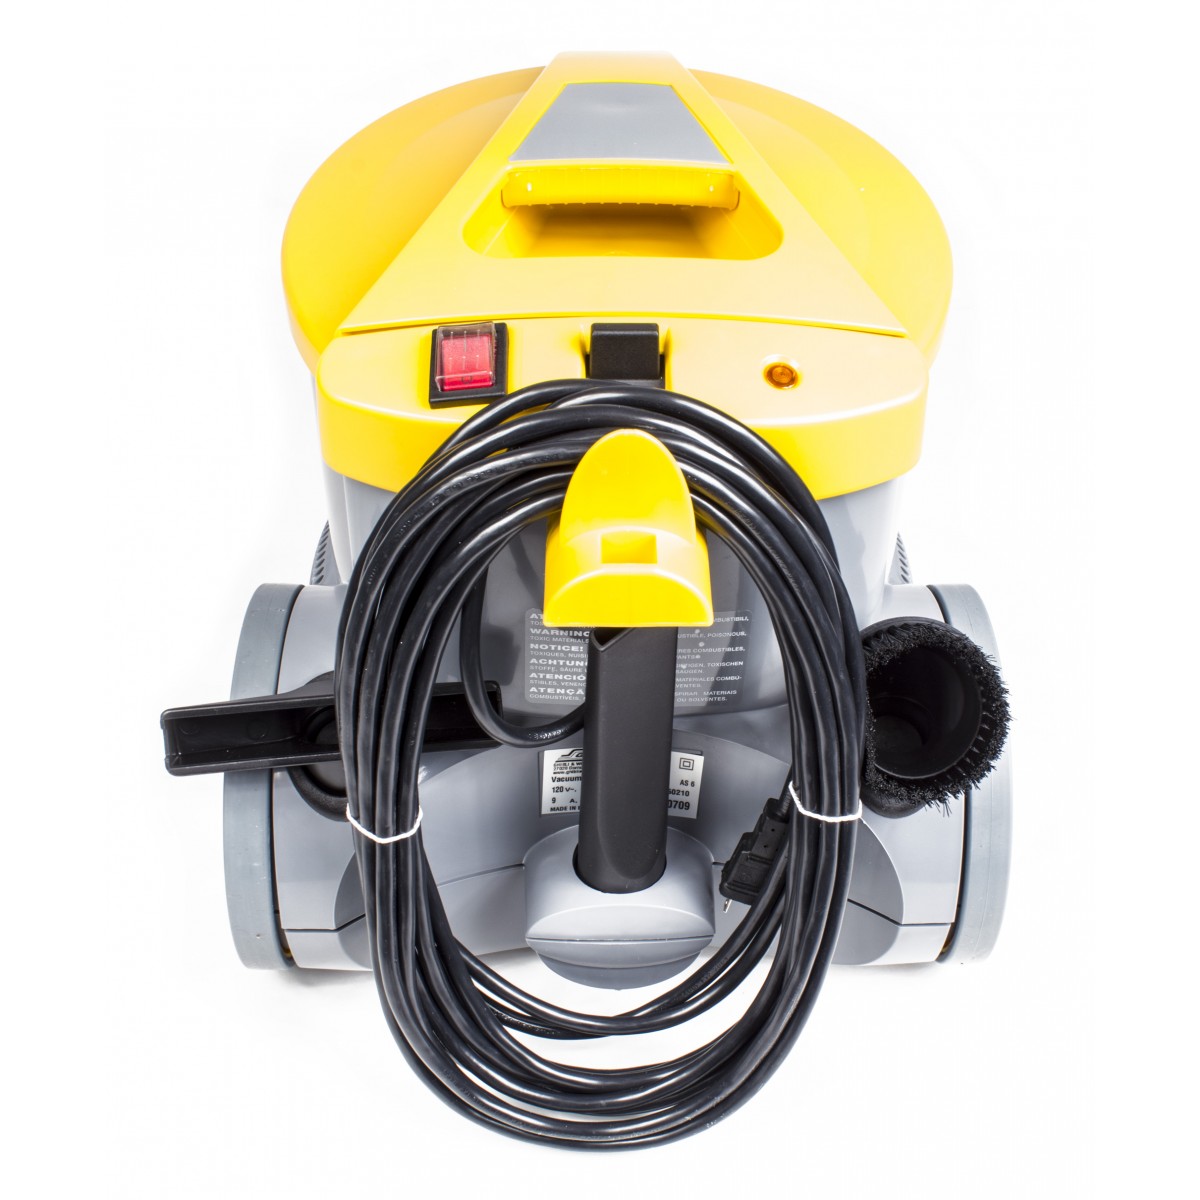 Johnny Vac AS6 Commercial Canister Vacuum - Cord